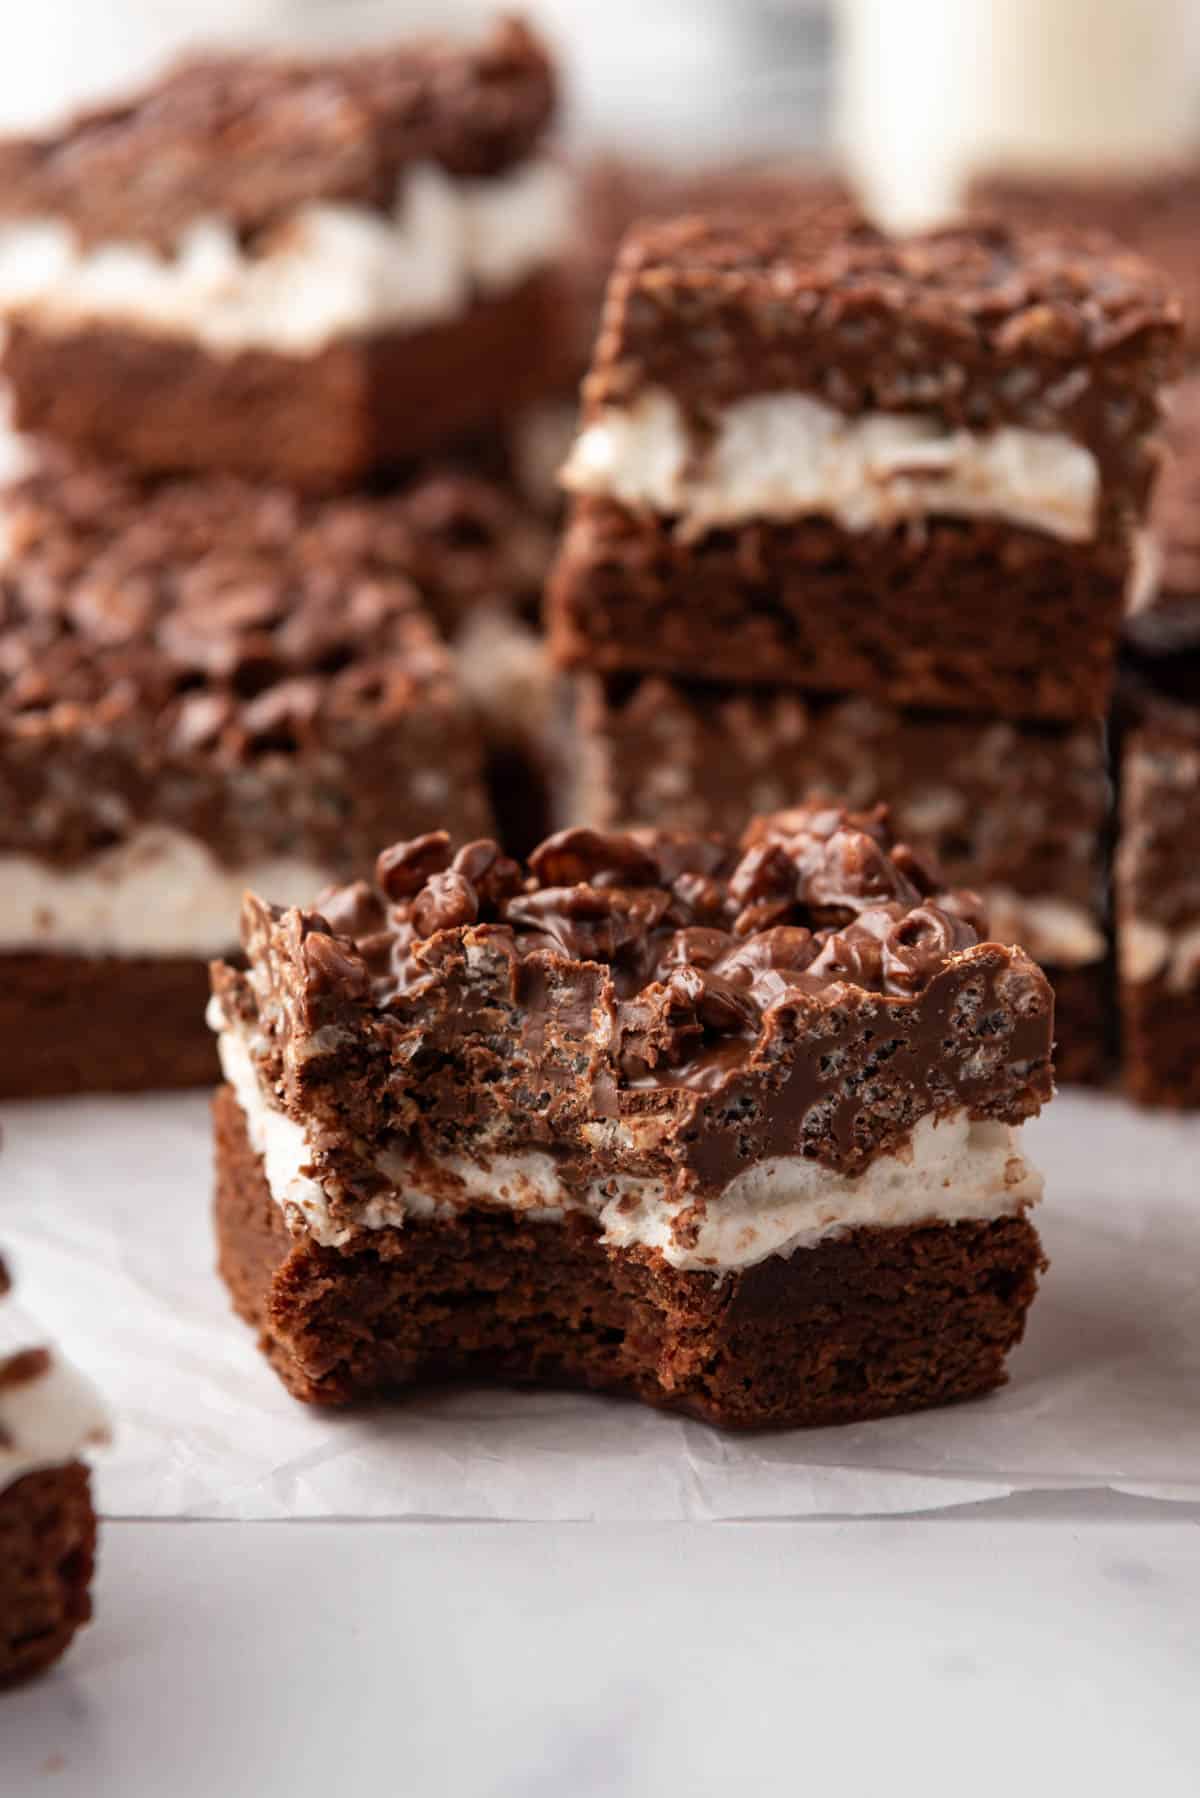 An image of a chocolate peanut butter crunch brownie with marshmallows with a bite taken out of one corner.